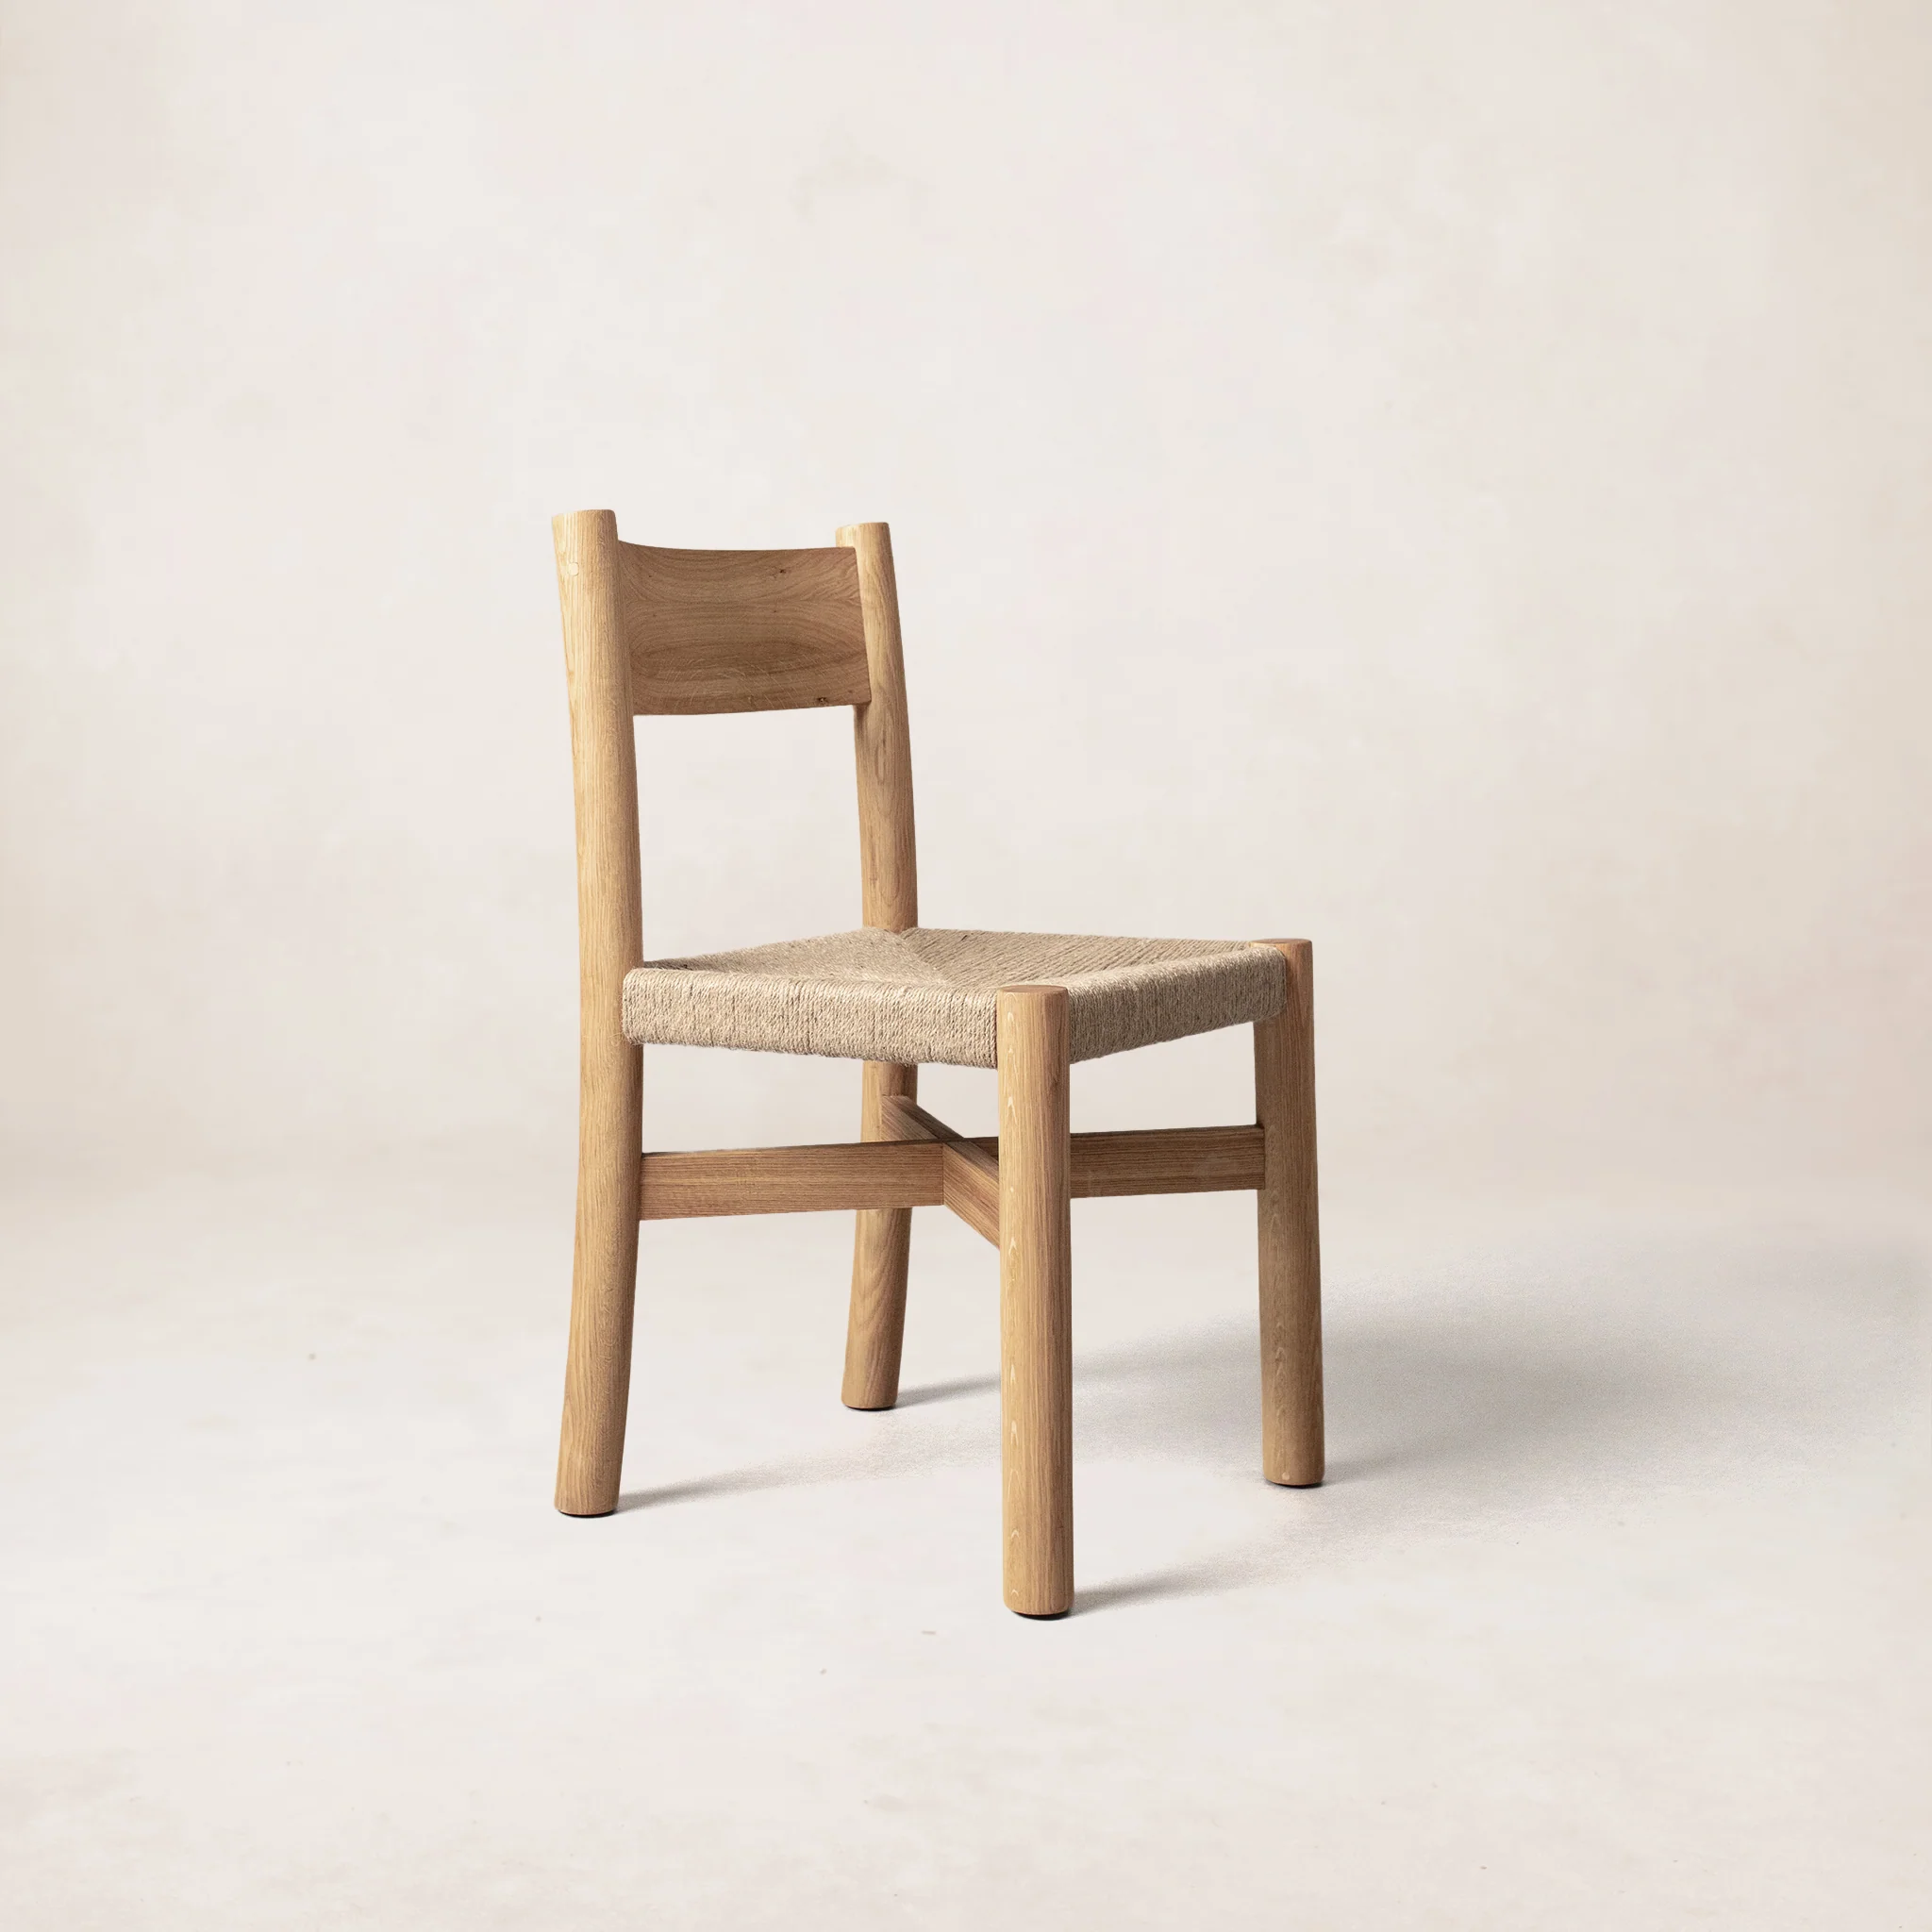 a wooden chair with a woven seat